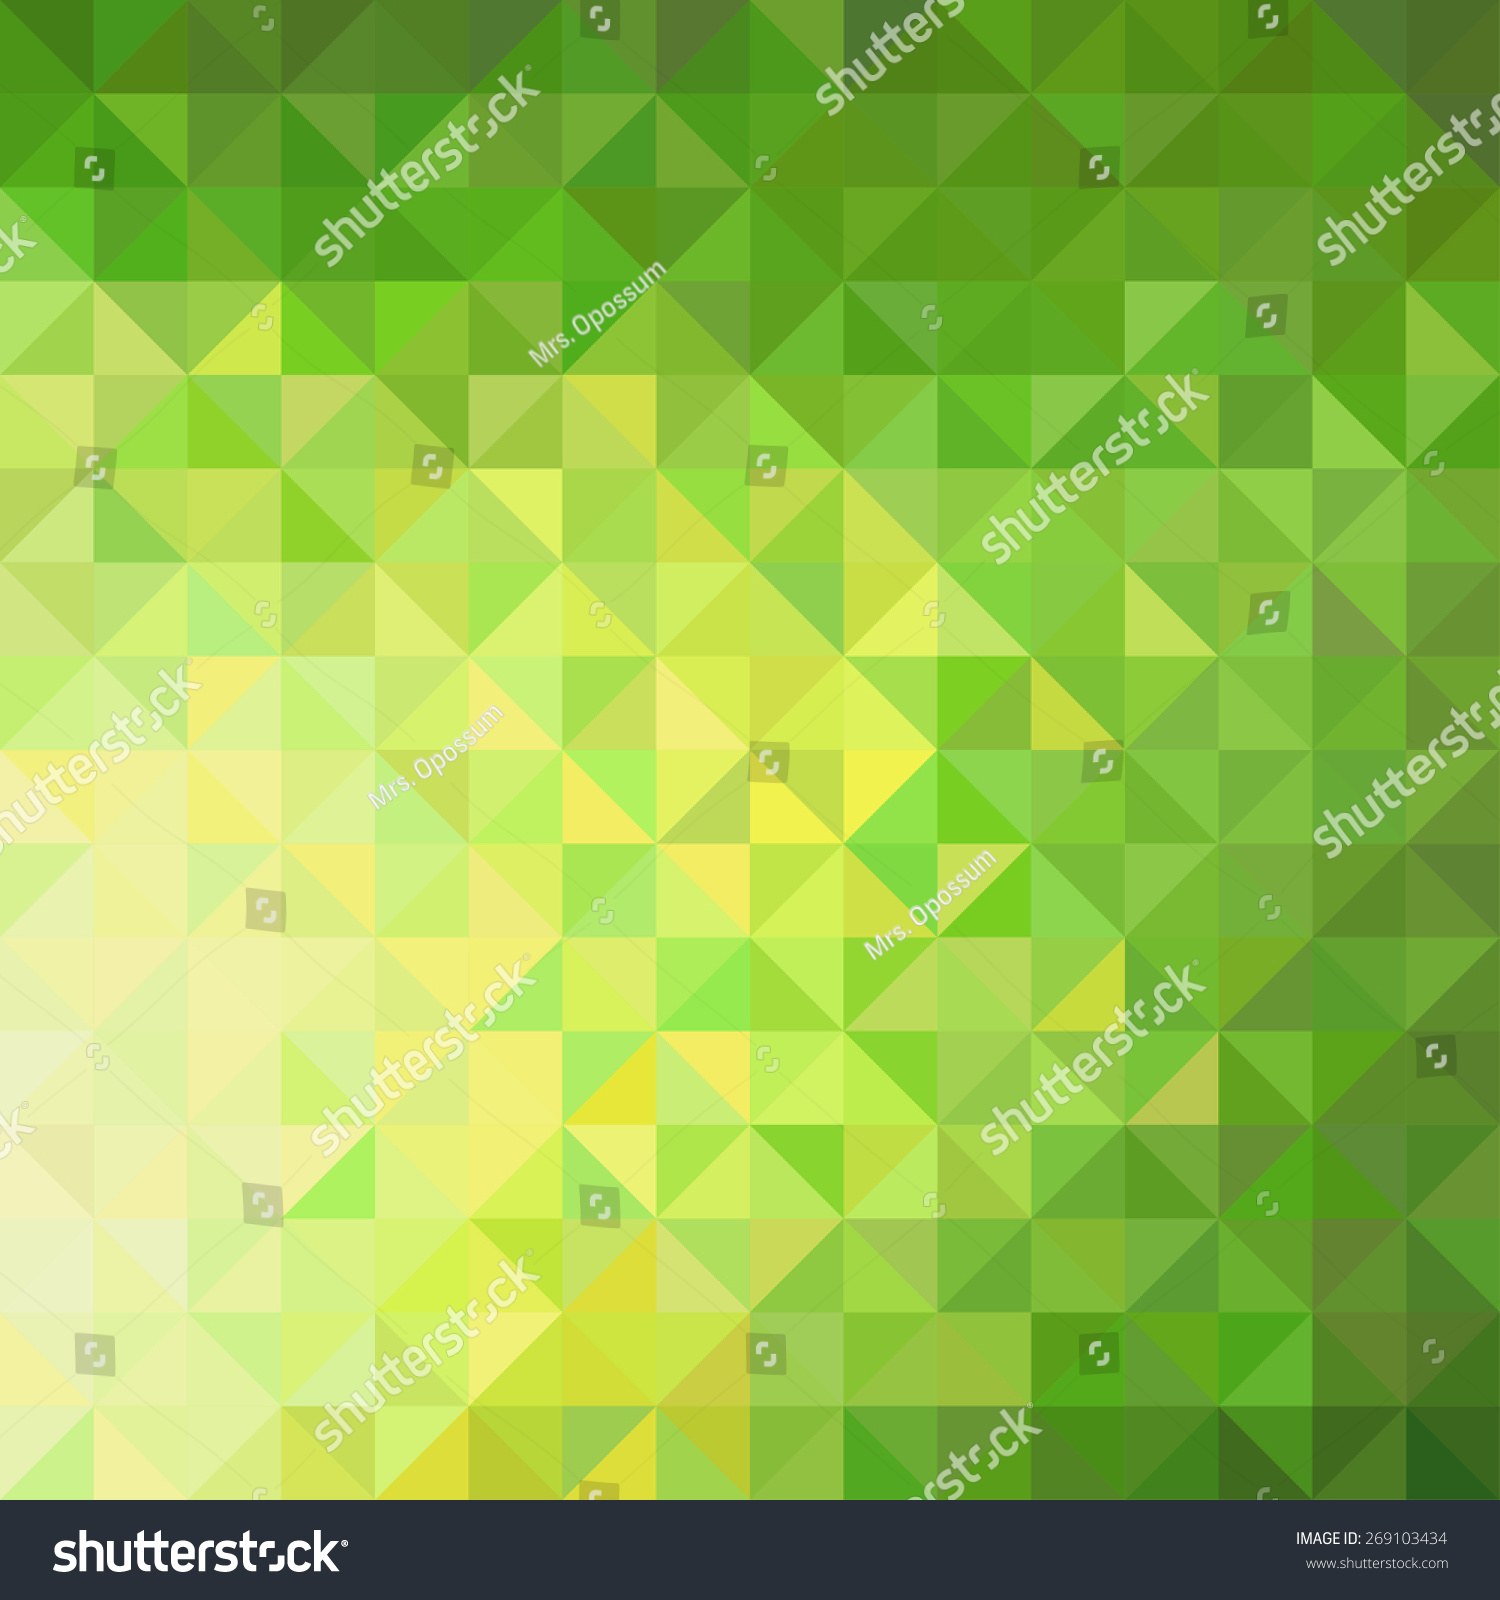 Background Of Geometric Shapes. Colorful Mosaic Pattern. Retro Triangle ...